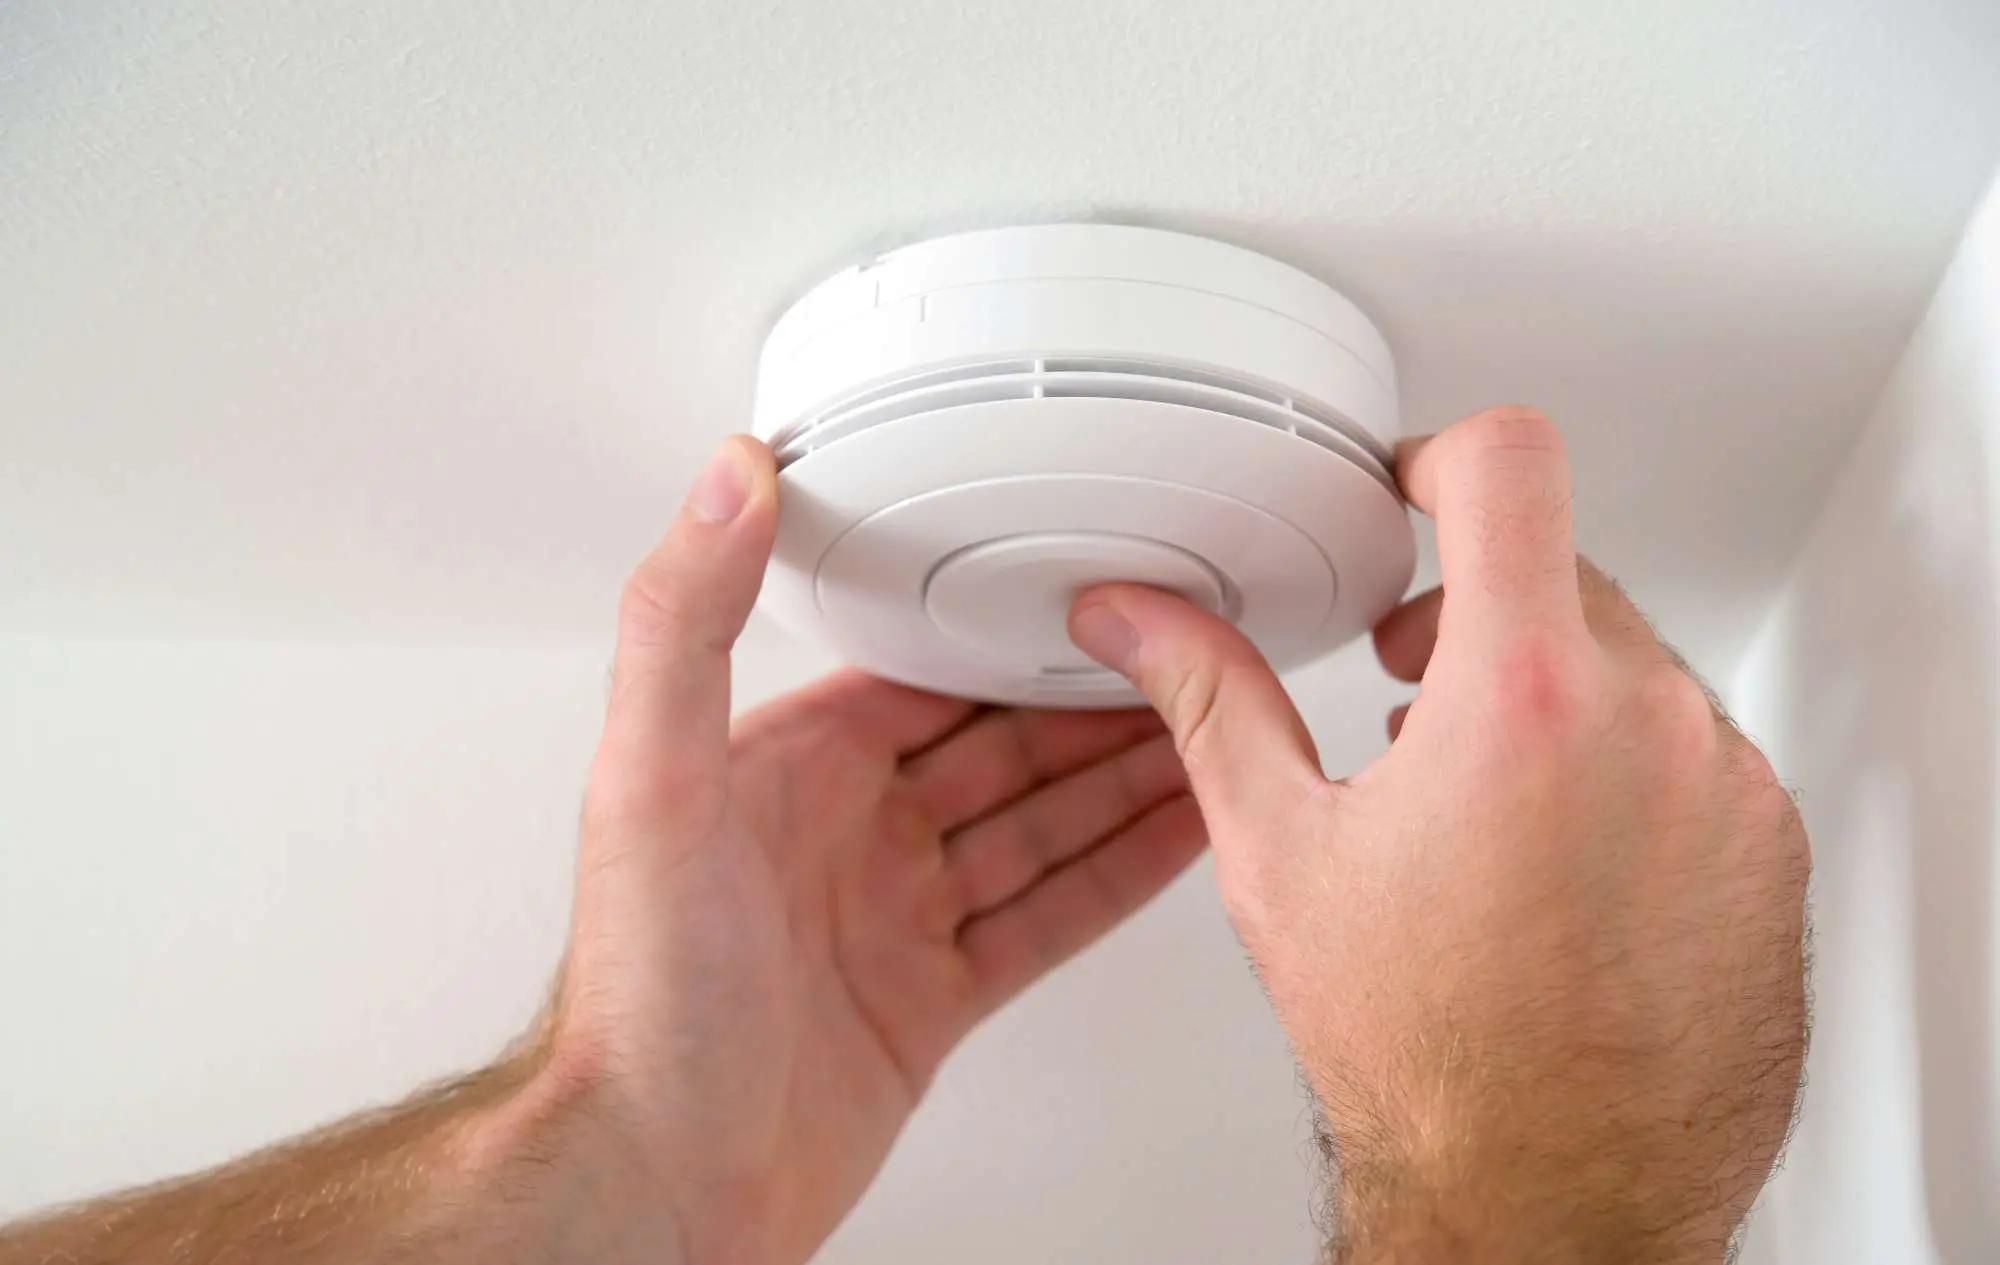 How Do You Know When Smoke Detector Battery Is Low